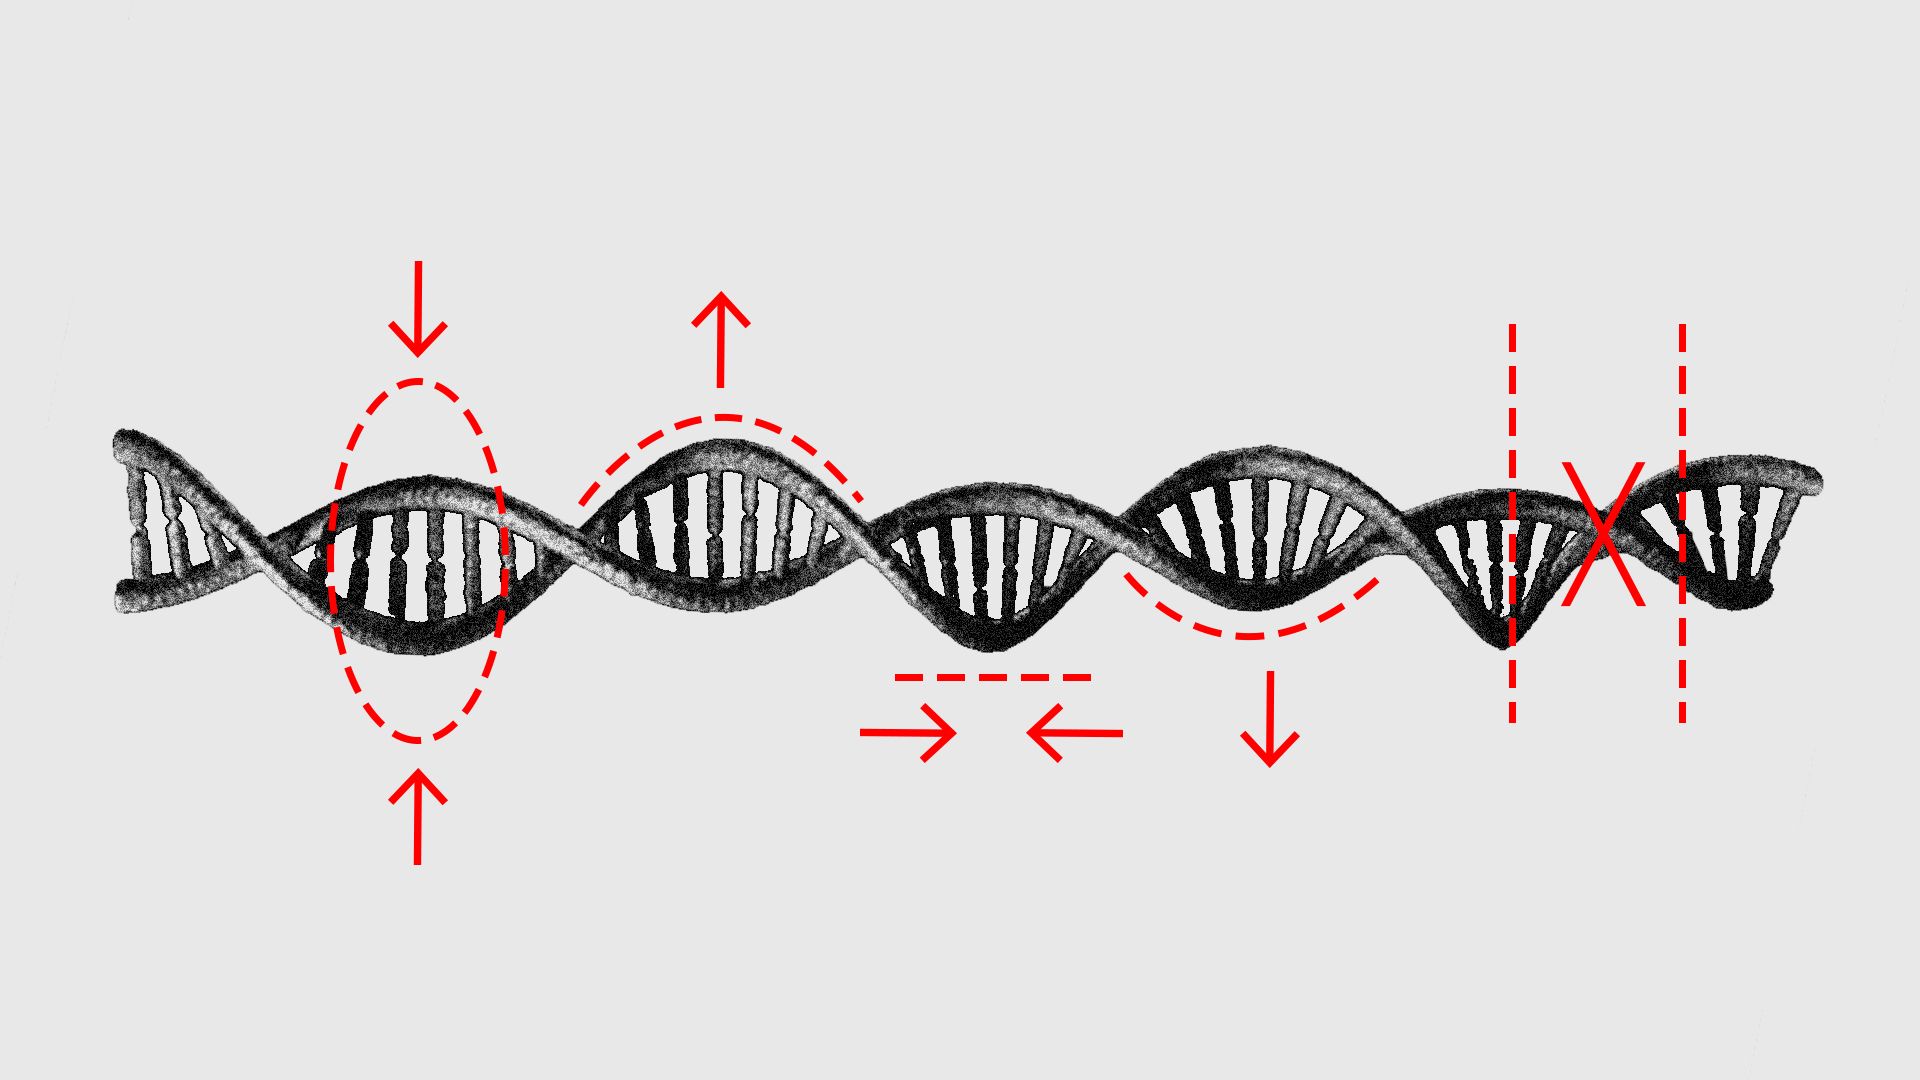 Illustration of DNA molecule with edits.